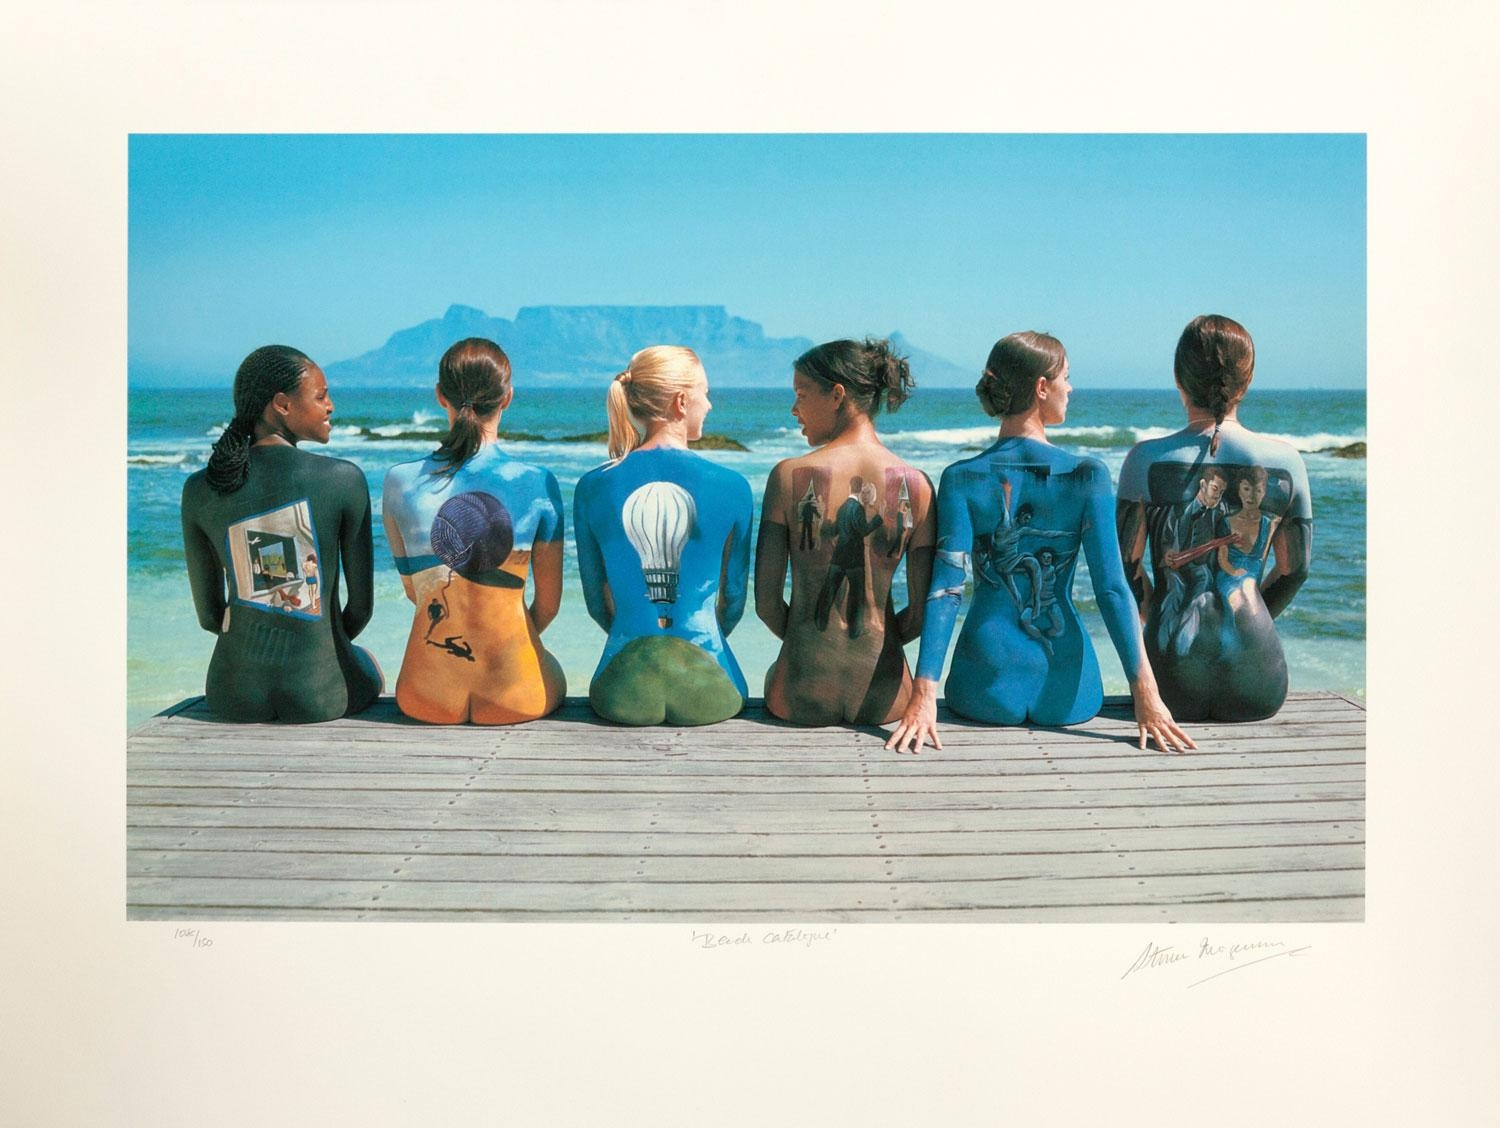 BEACH CATALOGUE by Storm Thorgerson